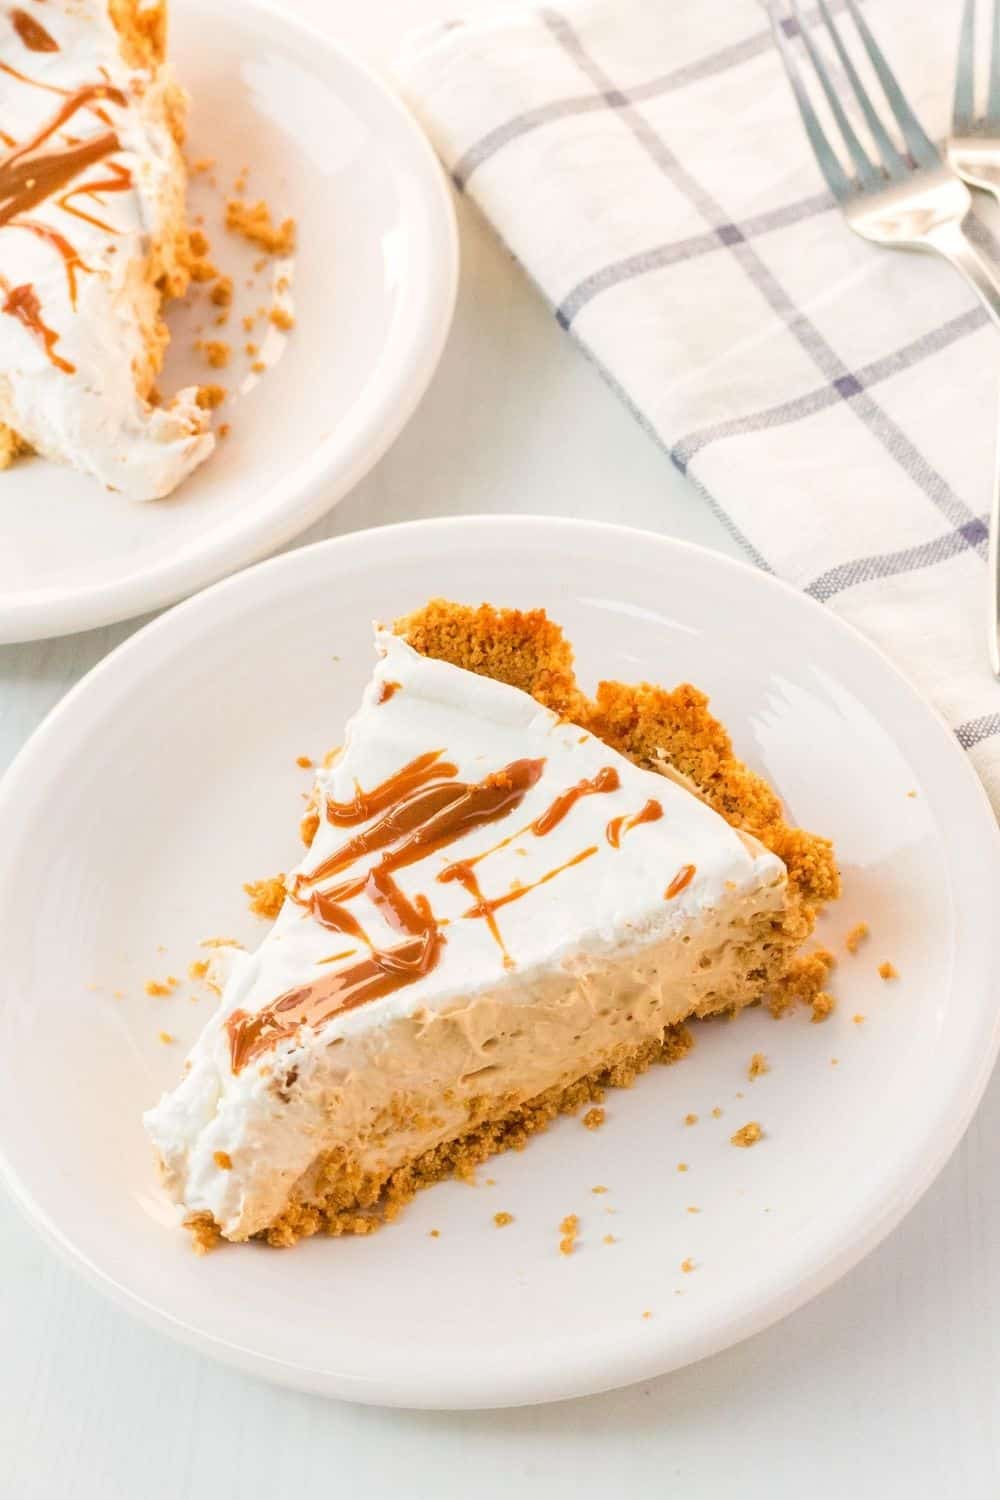 two slices of caramel cream pie on white plates for serving, with two forks in the background